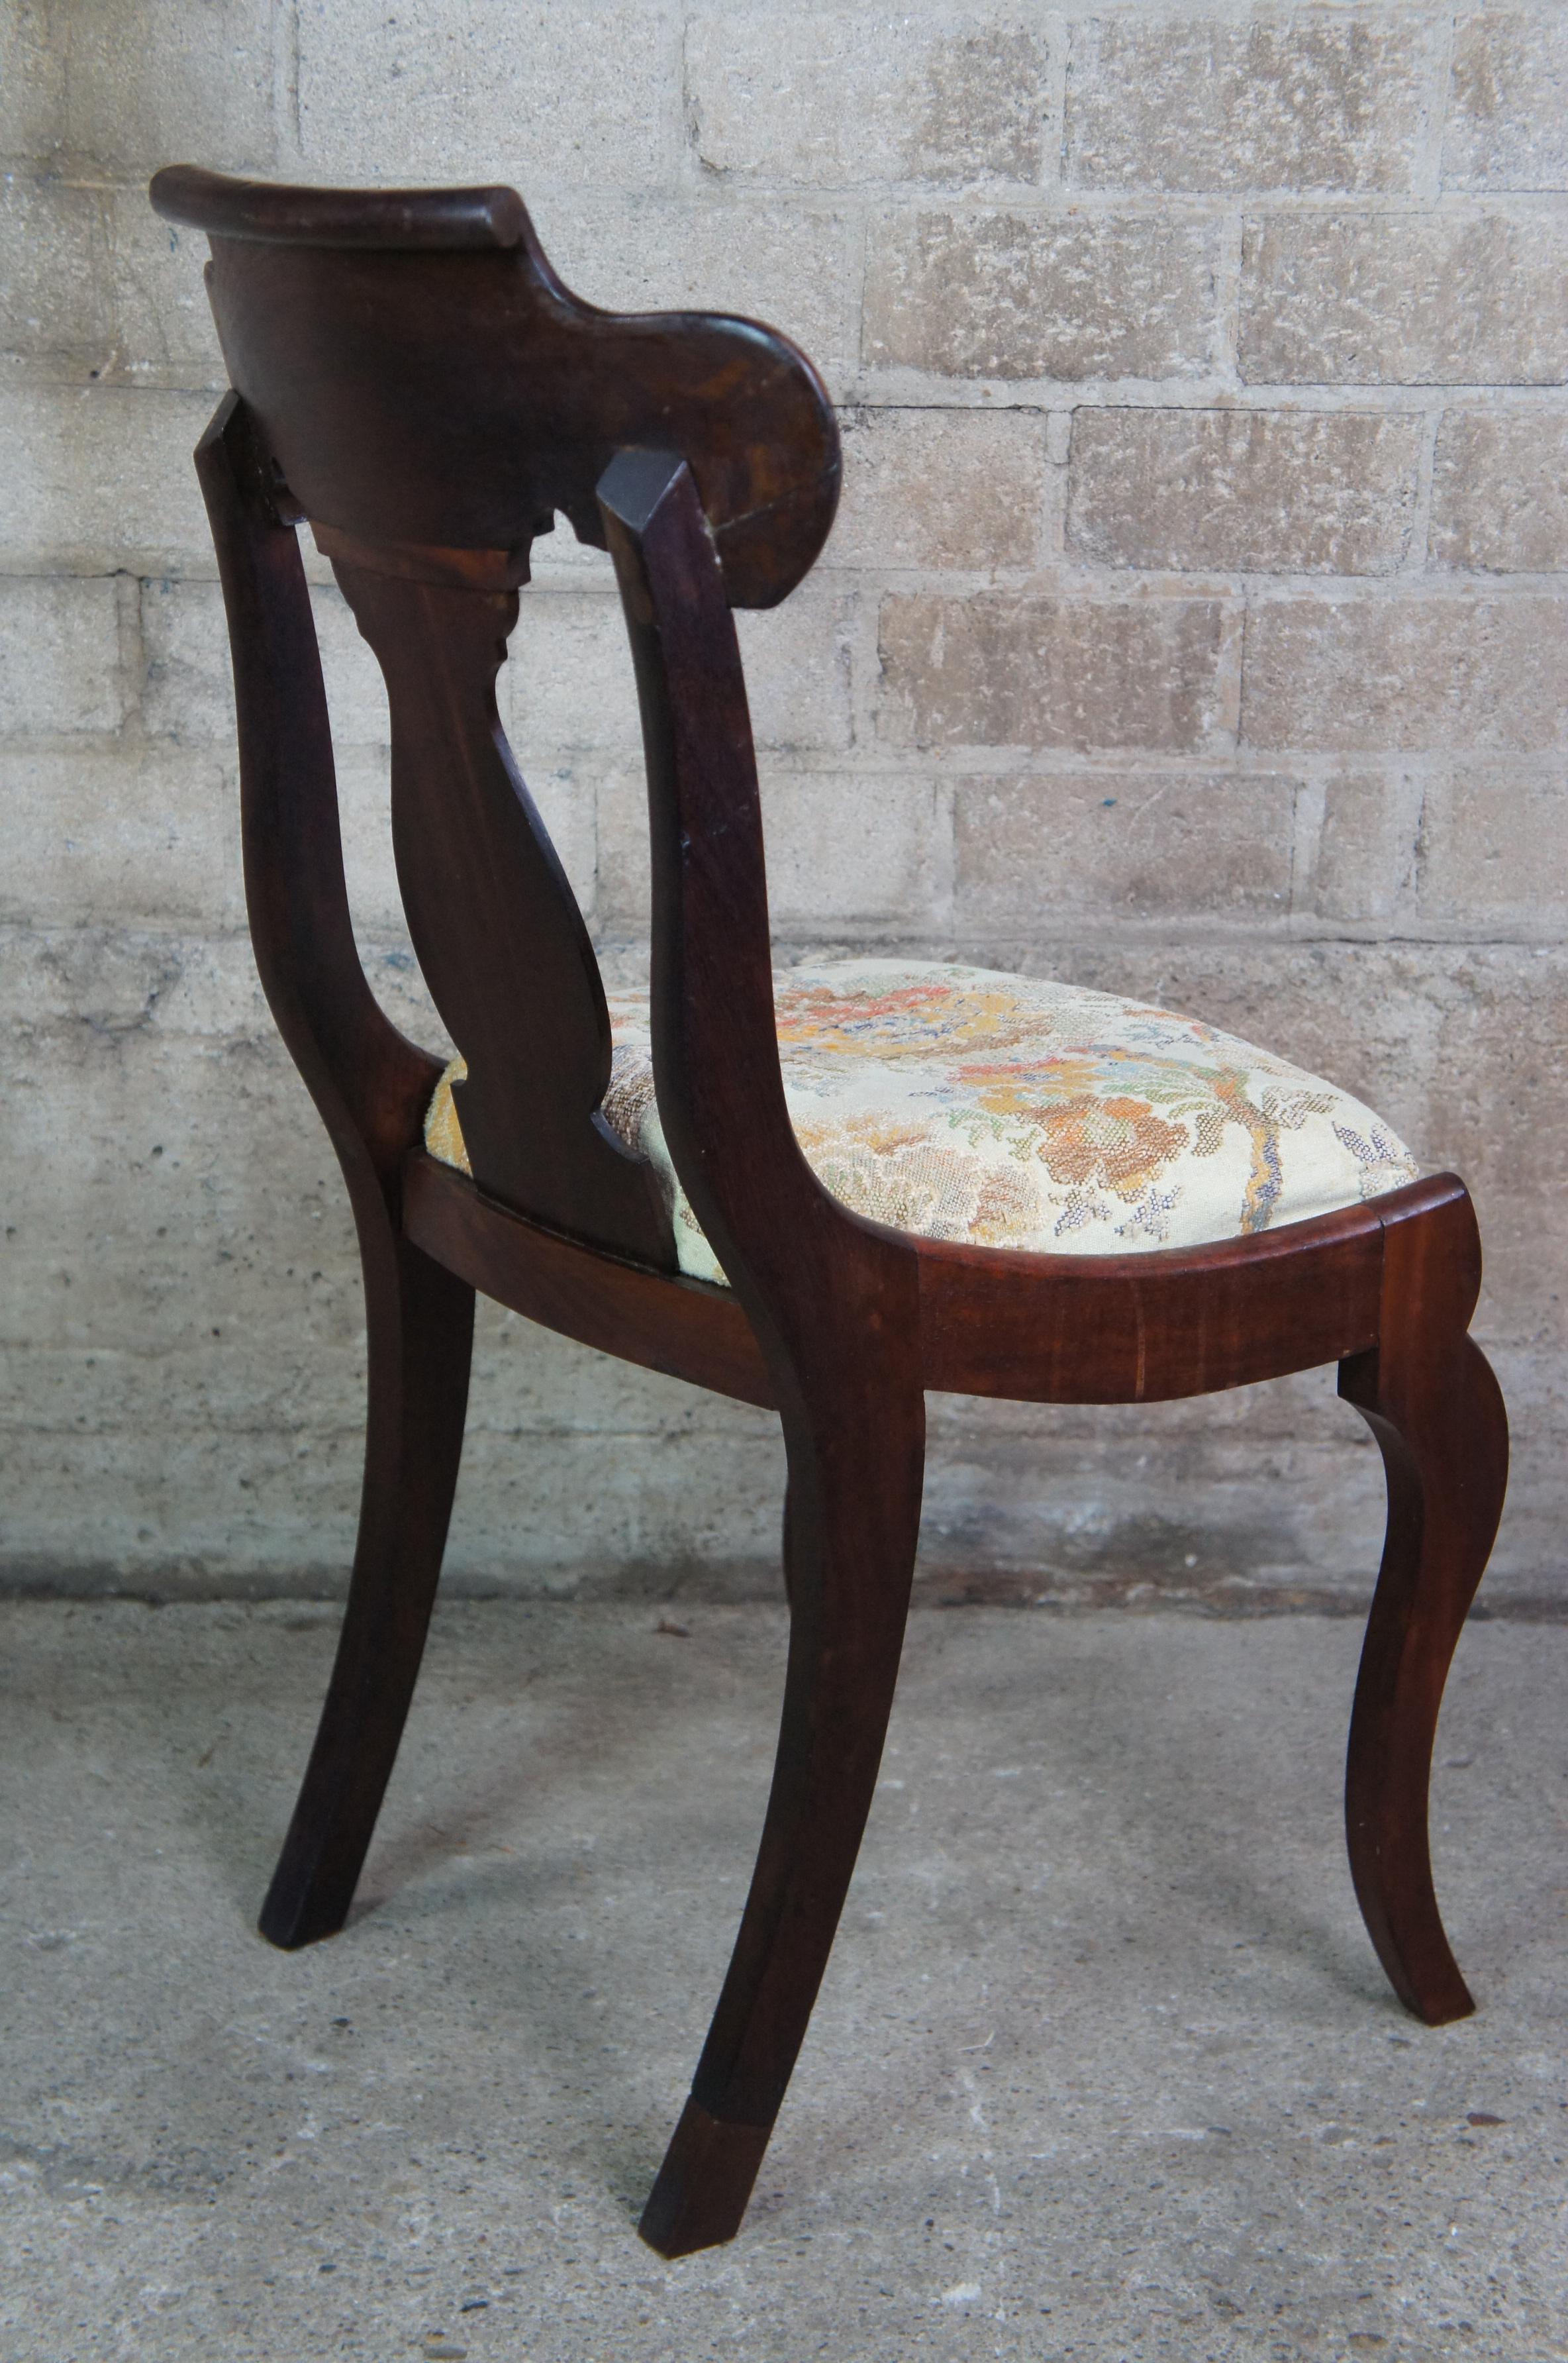 Antique 19th Century American Empire Flame Mahogany Parlor Vanity Dining Chair For Sale 5